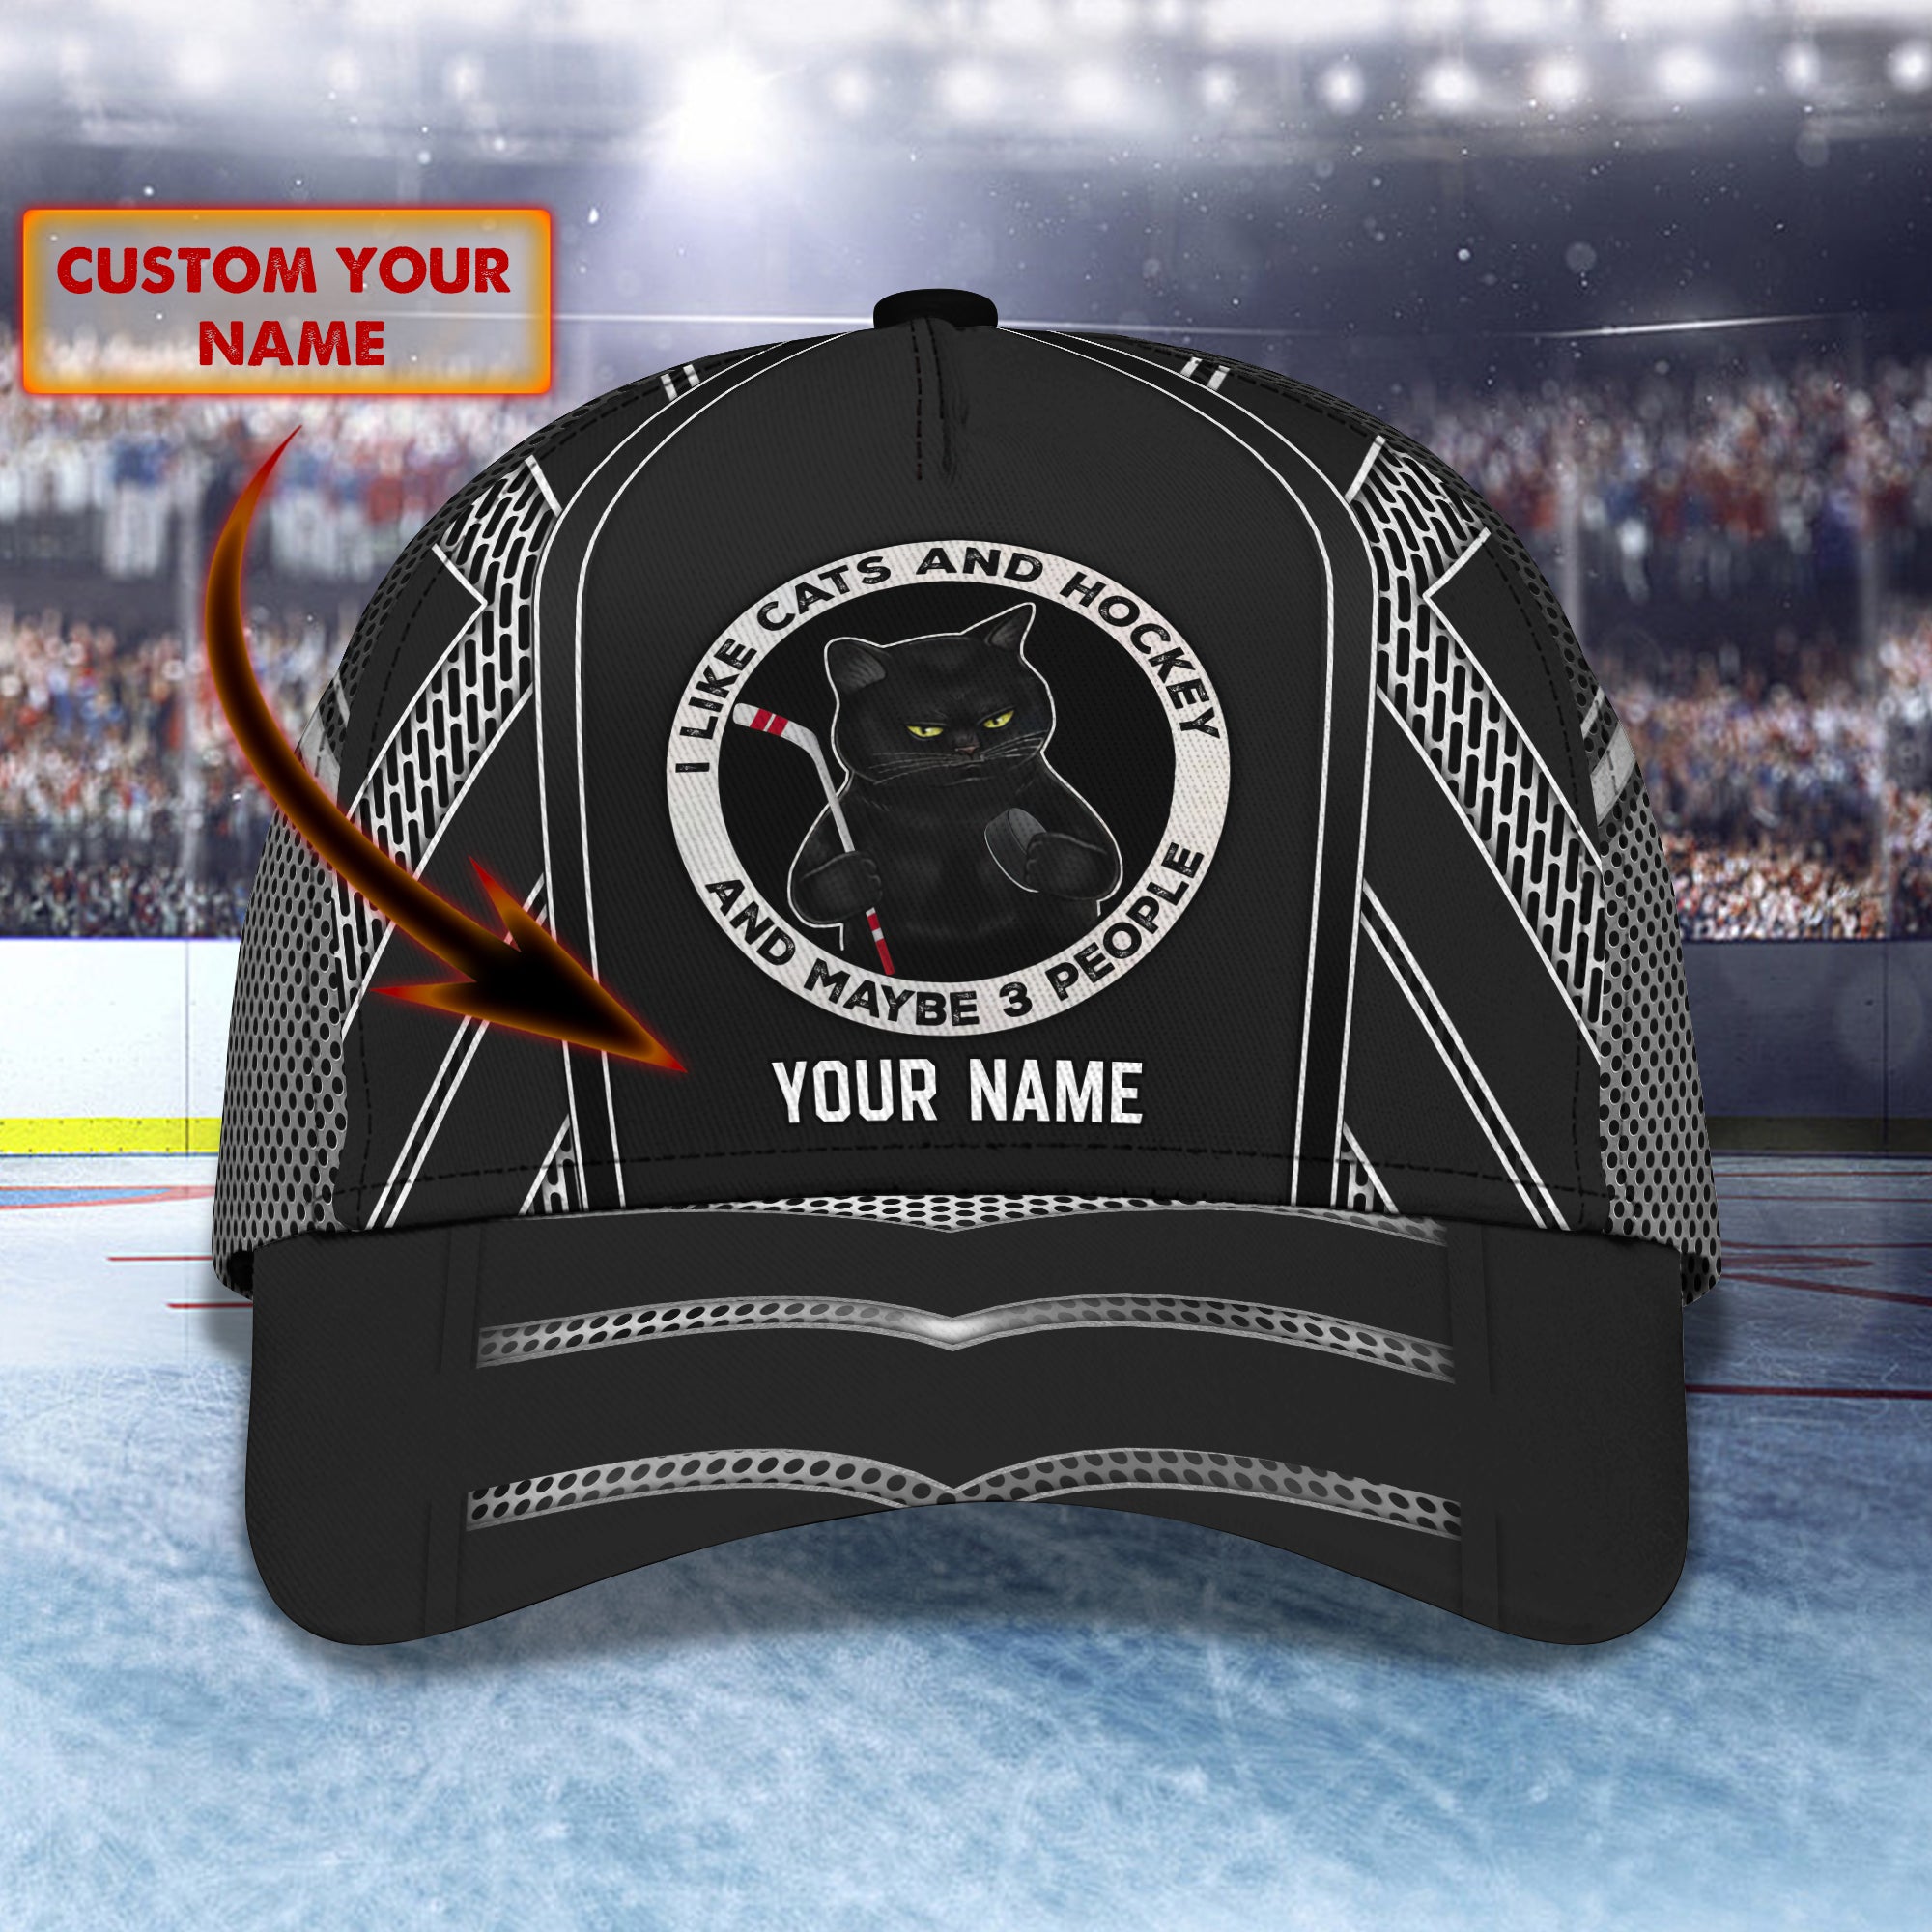 I Like Cat And Hockey- Personalized Name Cap - Loop- T2k-237